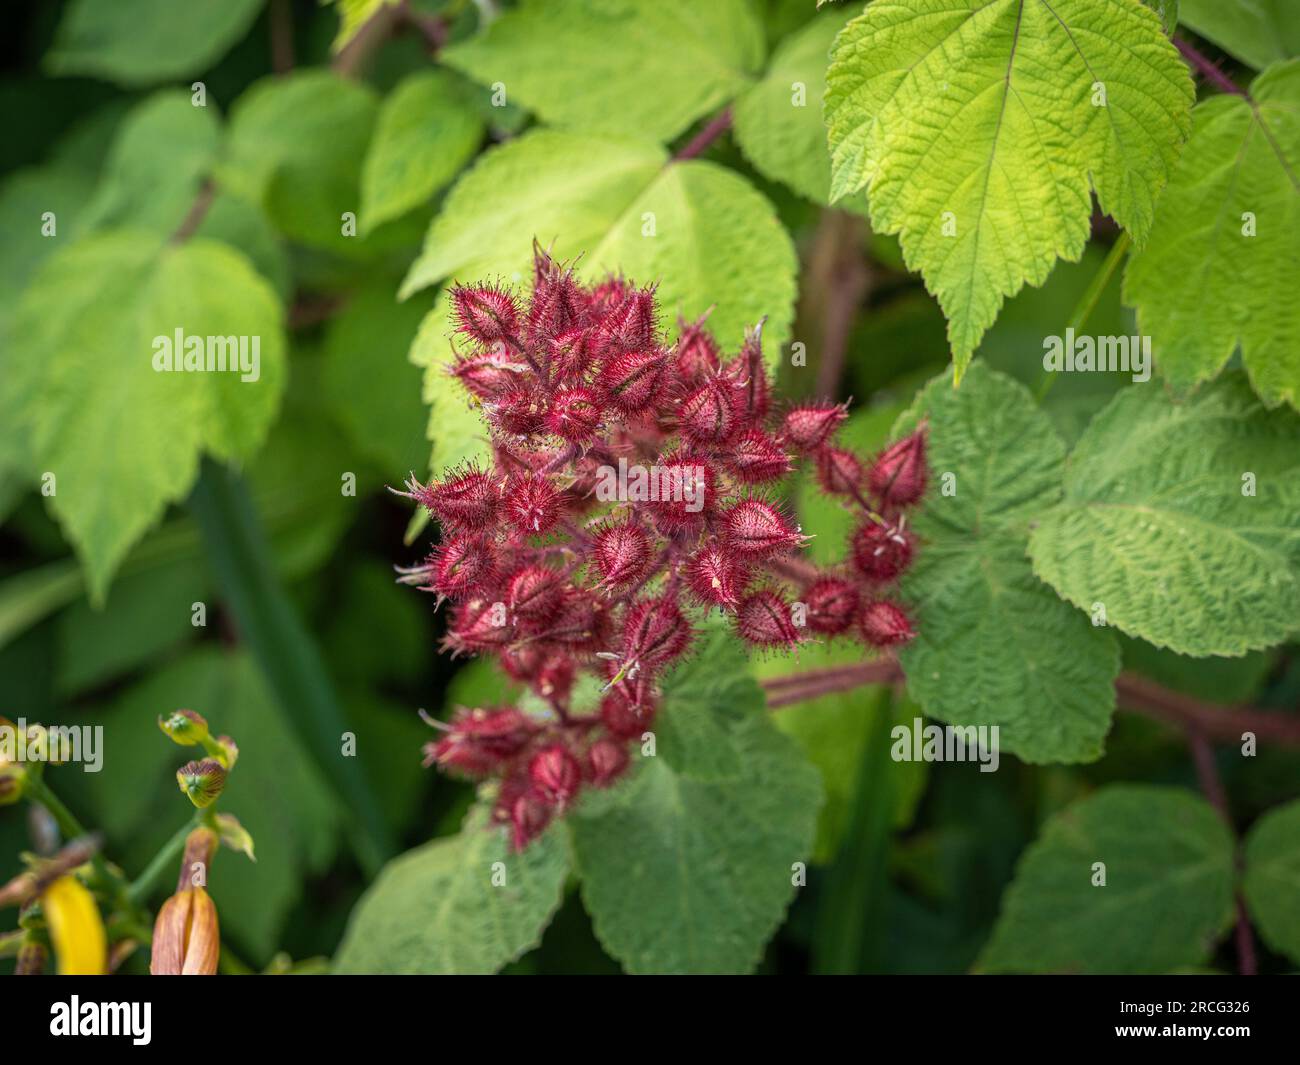 Young developing Japanese wineberry fruit covered by a hairy protective calyx, growing in a UK garden. Stock Photo